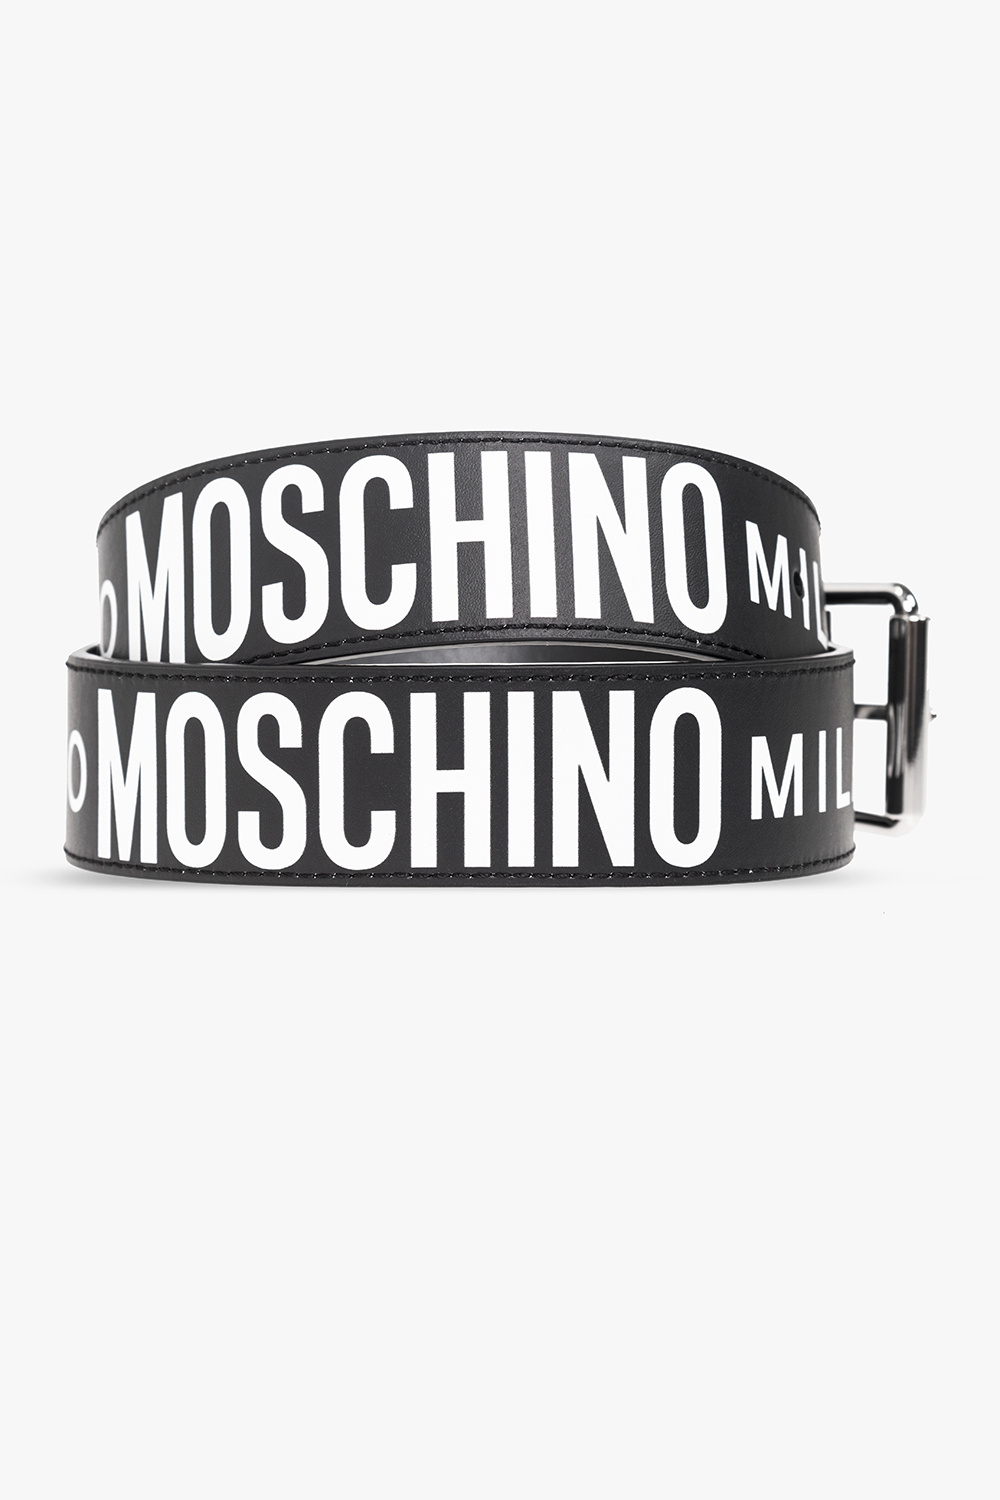 Moschino The hottest trend